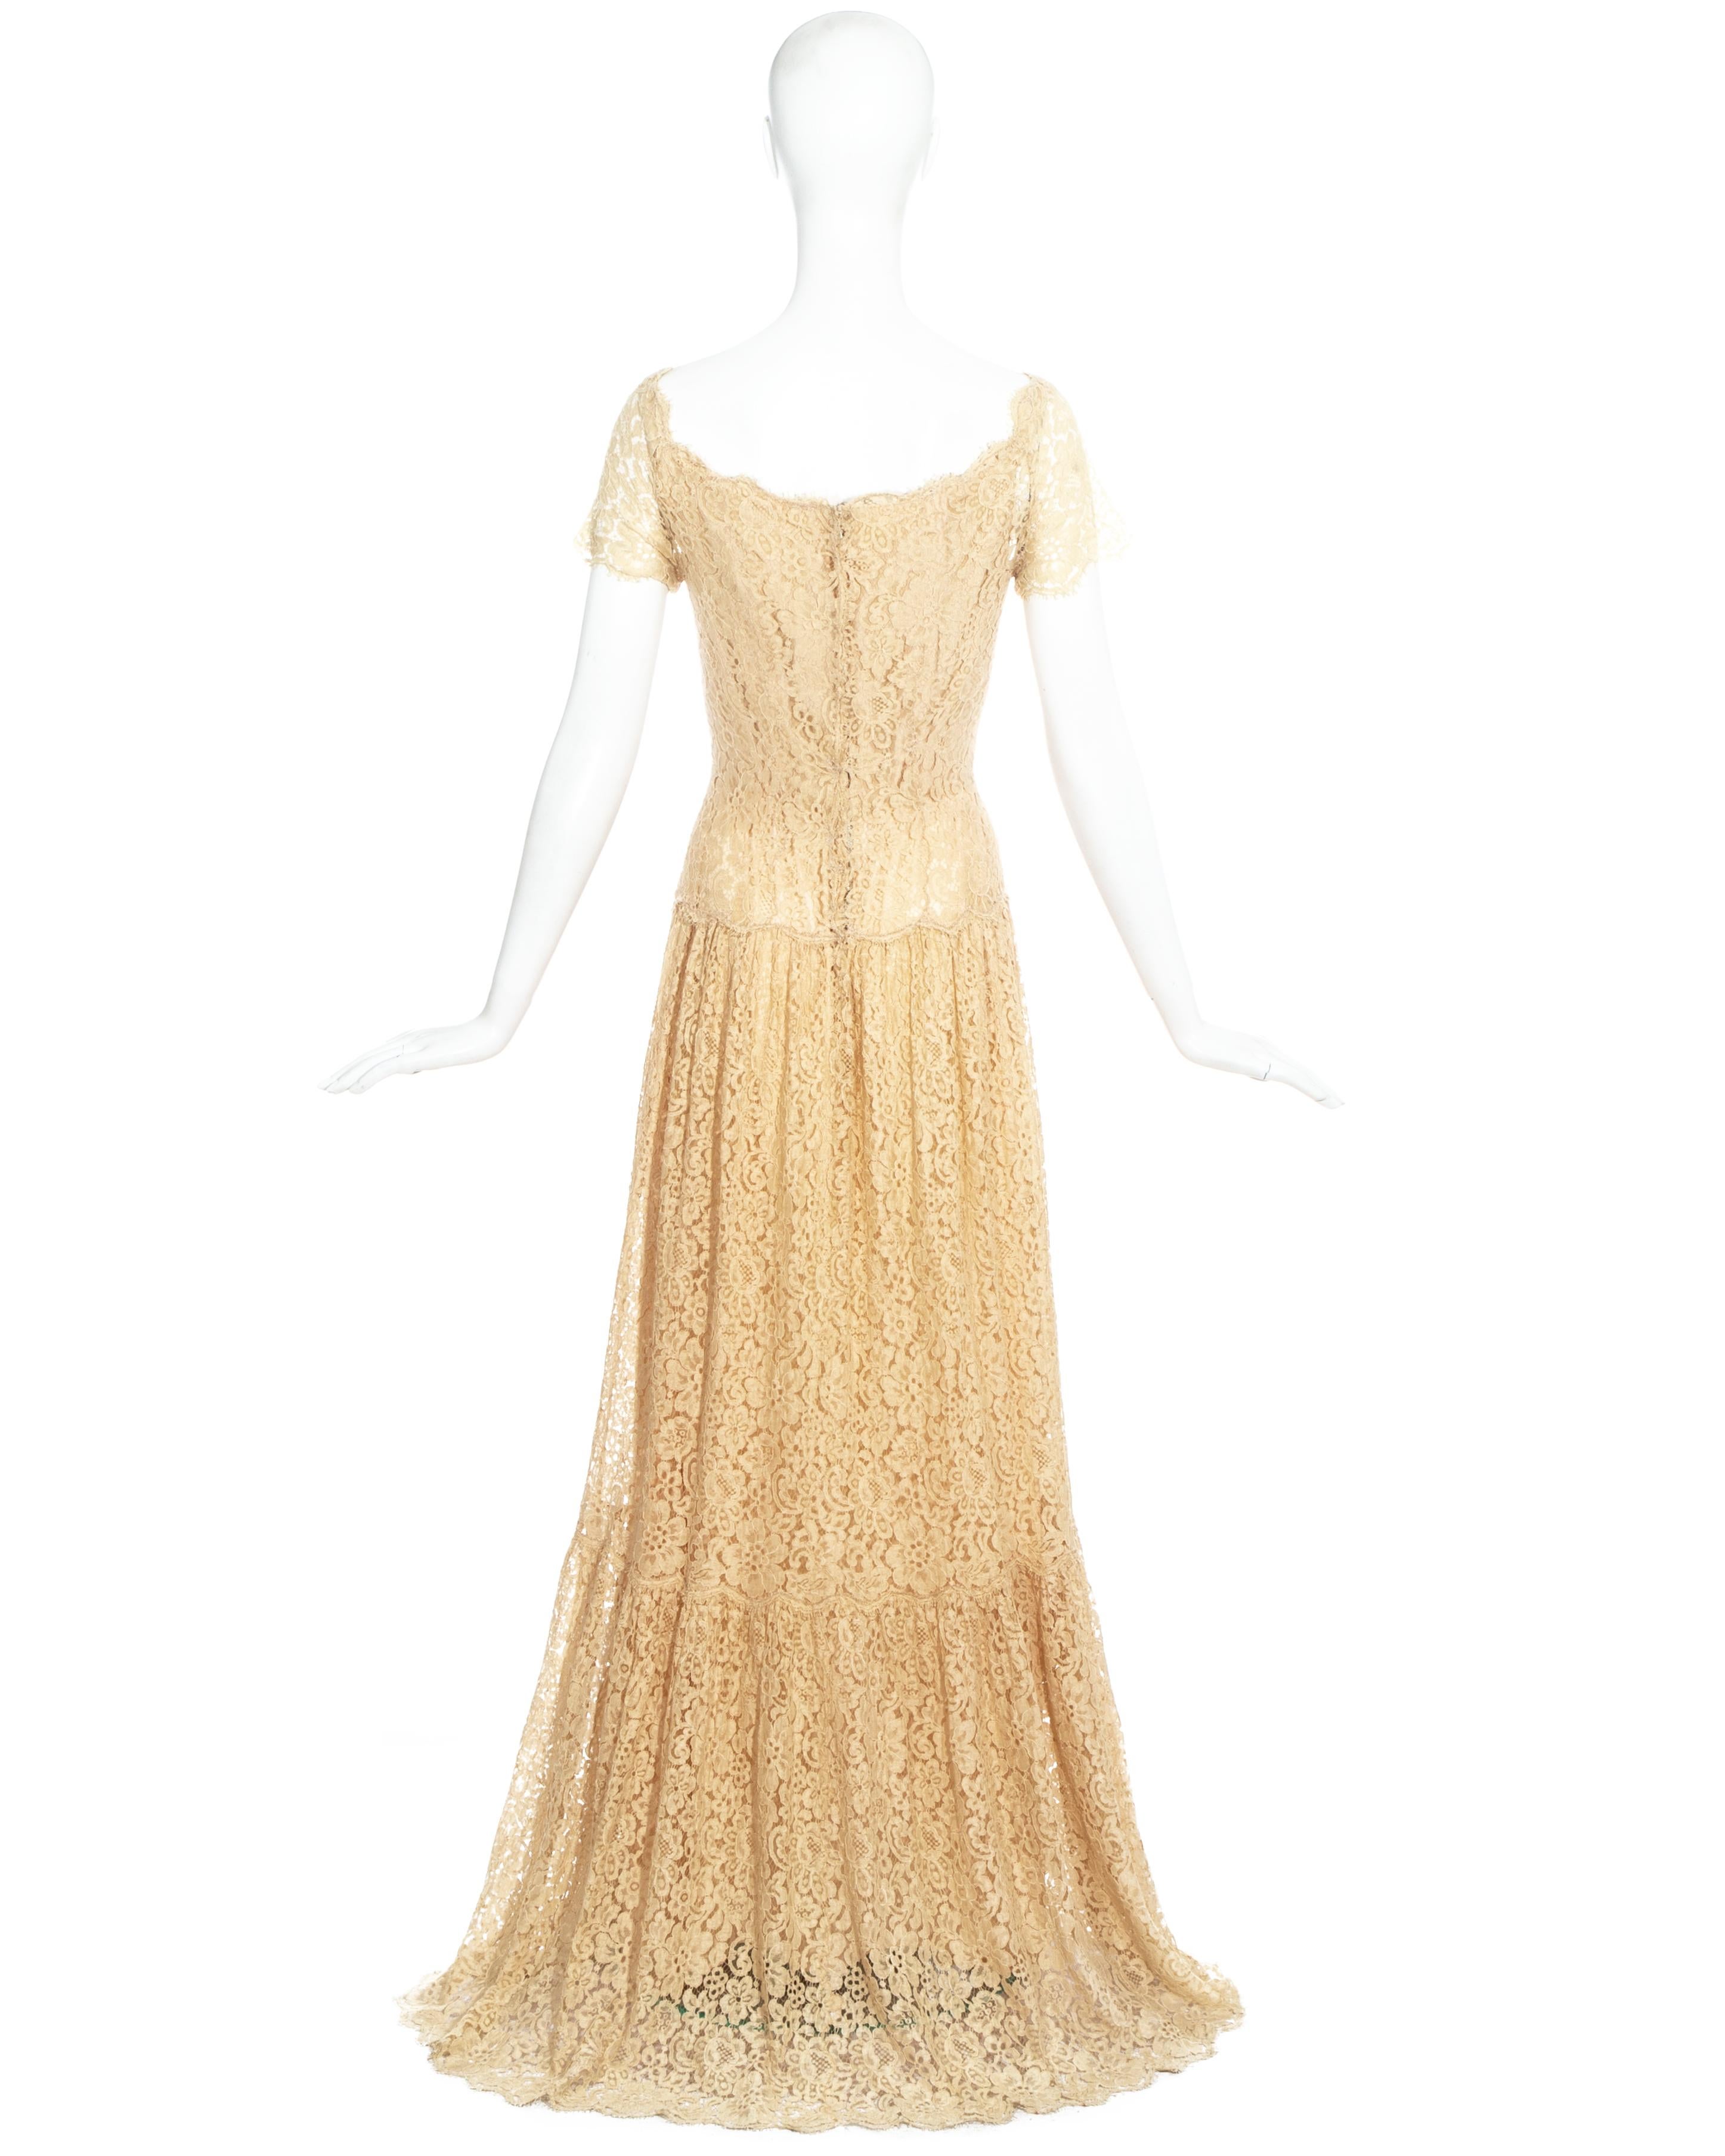 Chanel Haute Couture ivory lace wedding dress, c. 1960s For Sale 1